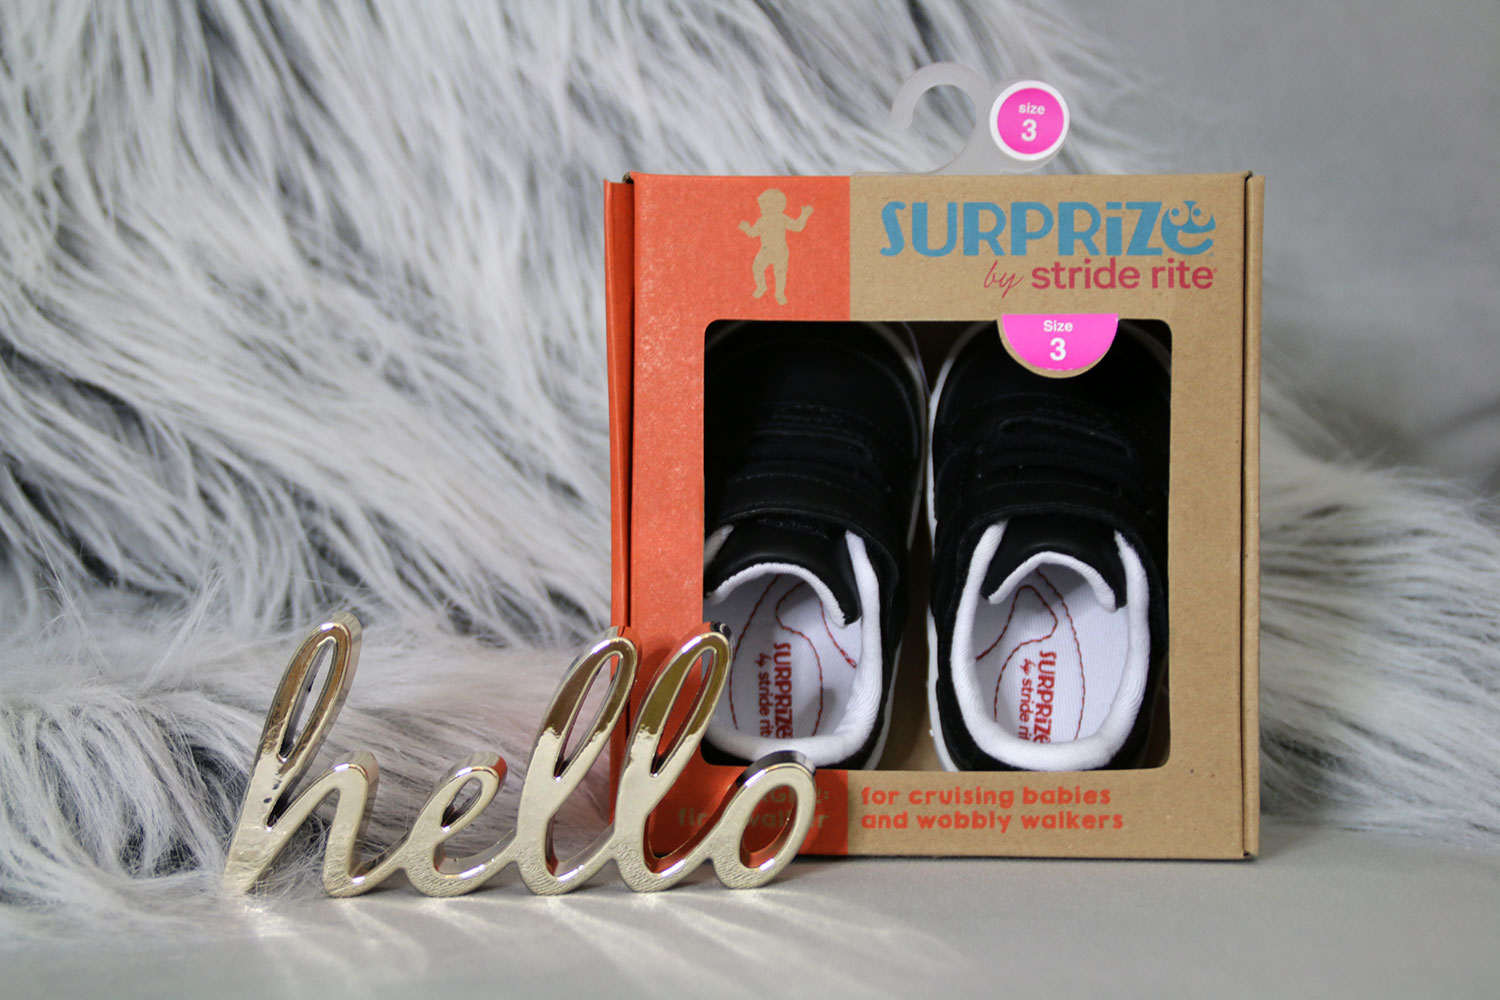 Surprize by Stride Rite